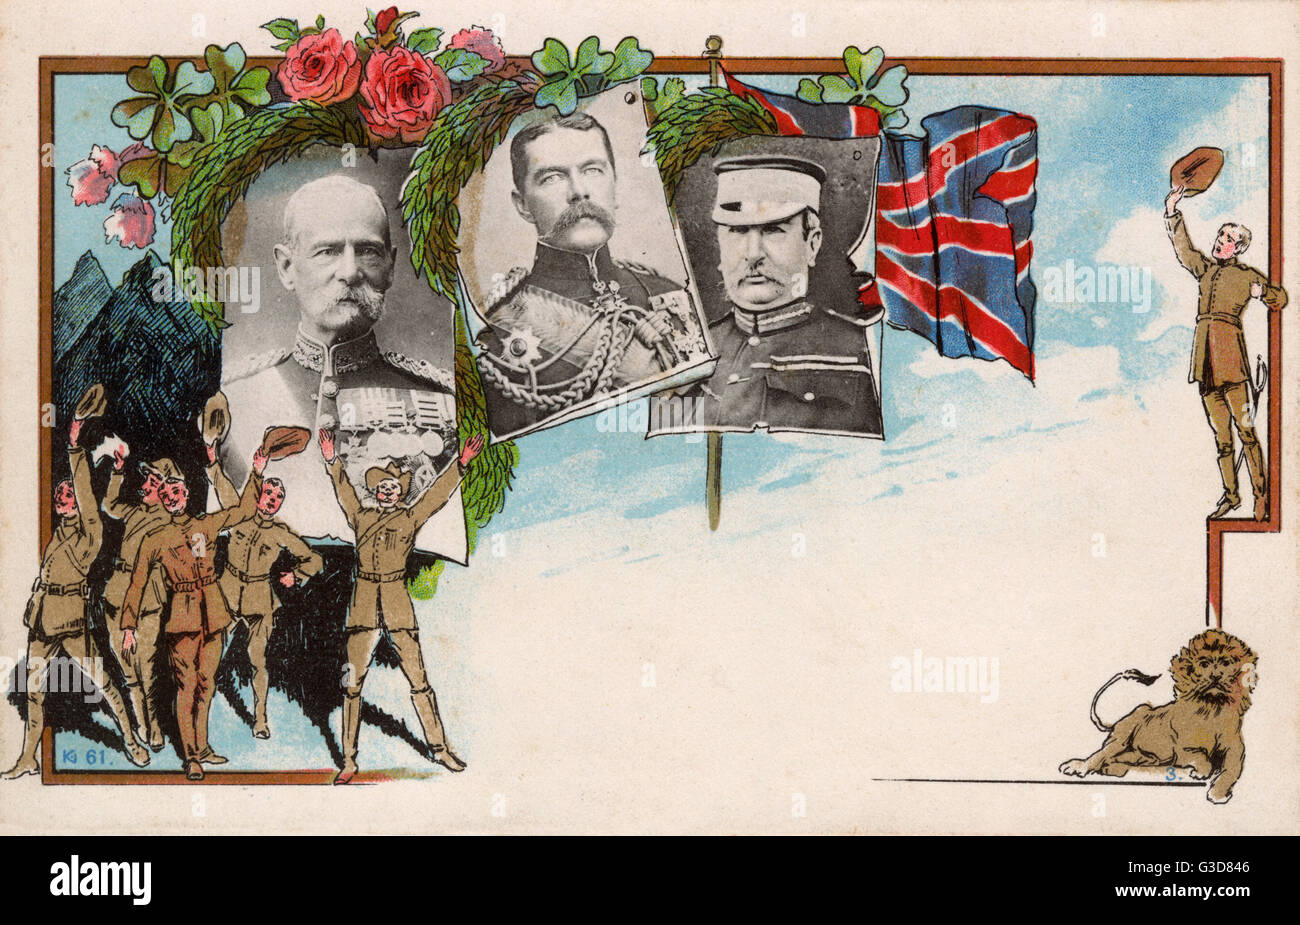 Second Boer War - British Military Commanders - Victory card Stock Photo